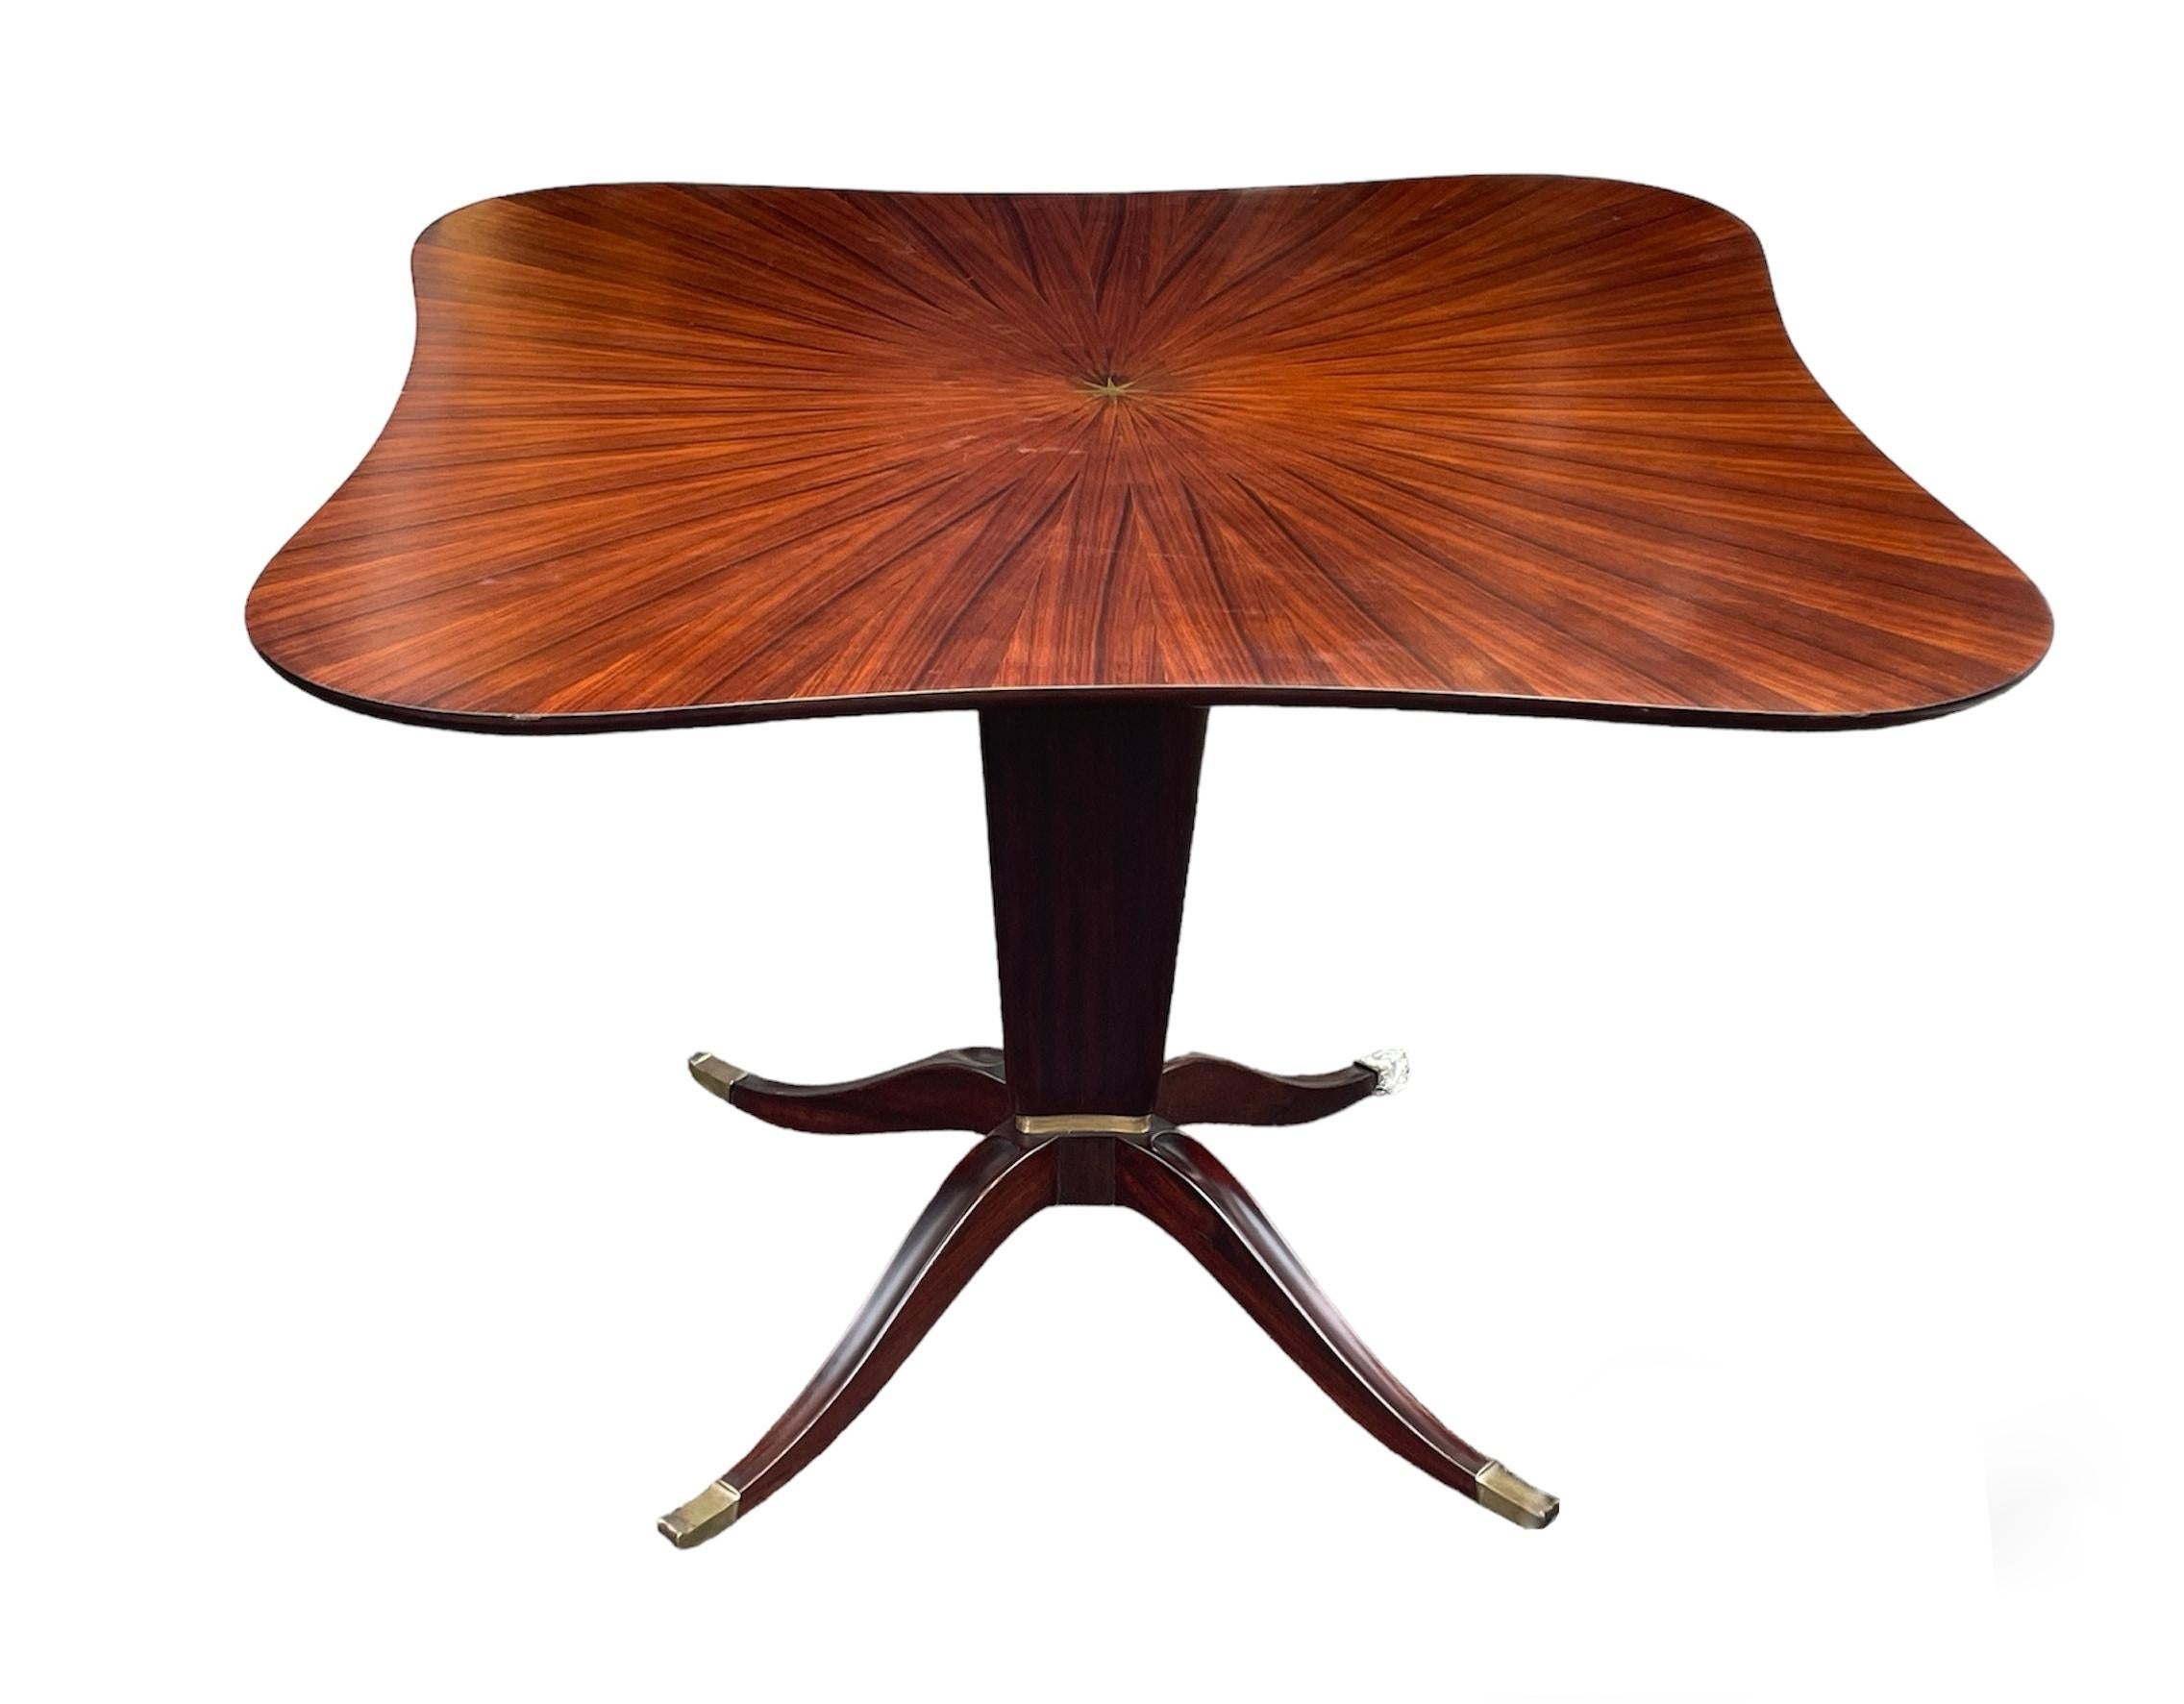 This is a wonderful Mid Century Dining Table and Chairs by The Famed Italian architect/designer, Paolo Buffa (1903-1970). This Rosewood Table and chairs is a perfect example of Italiam Mid Century design and construction. The Table with a starburst